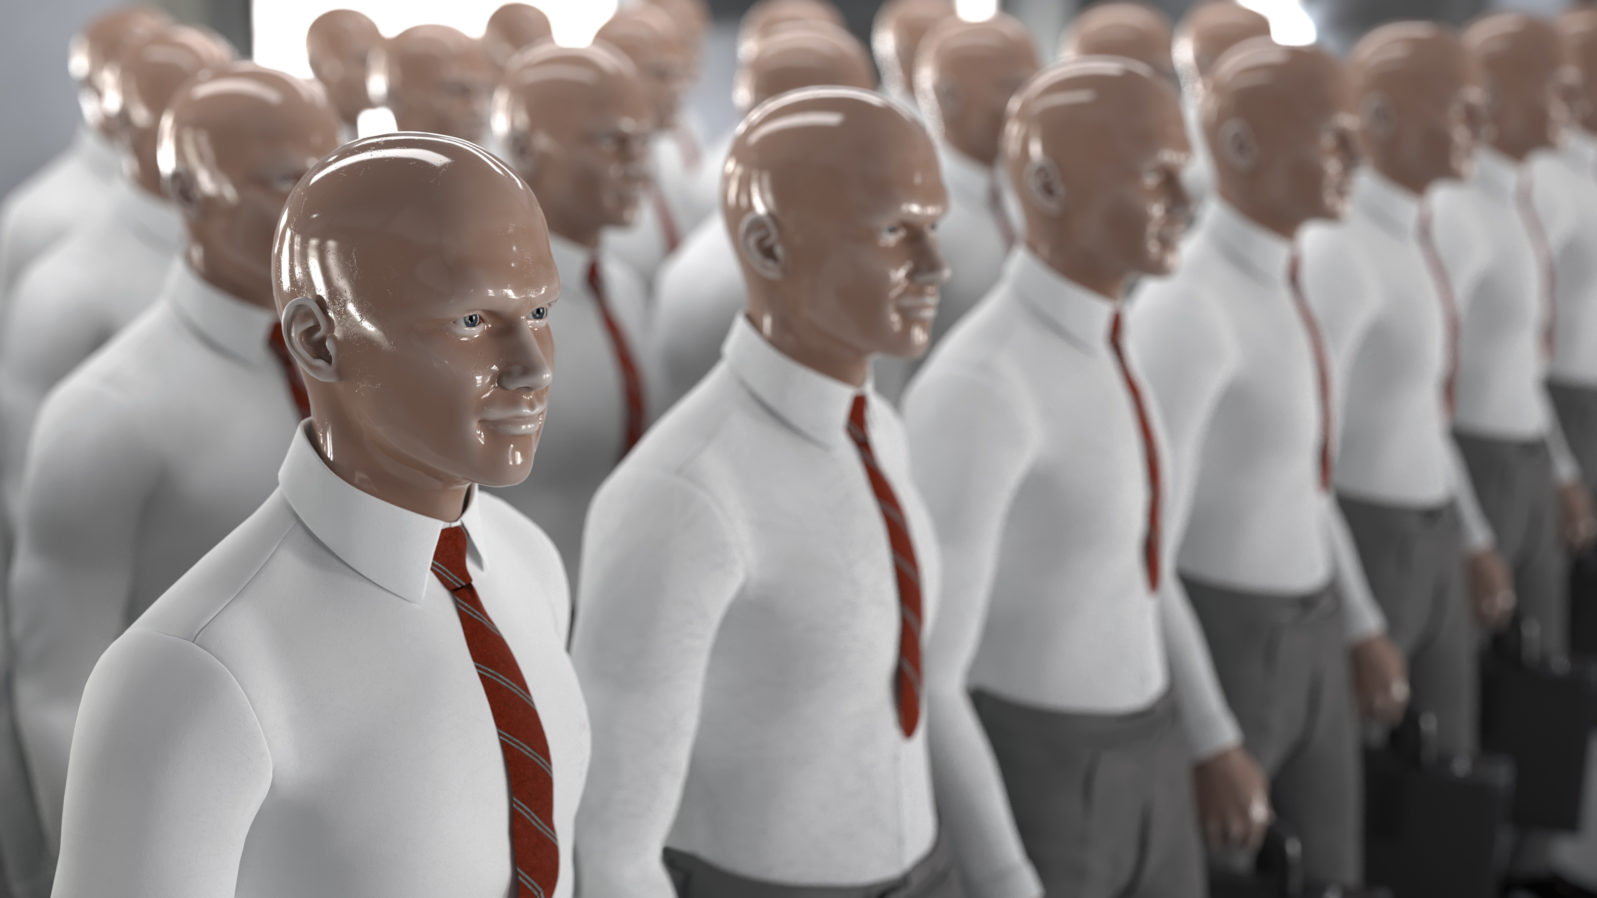 army of artificial workers